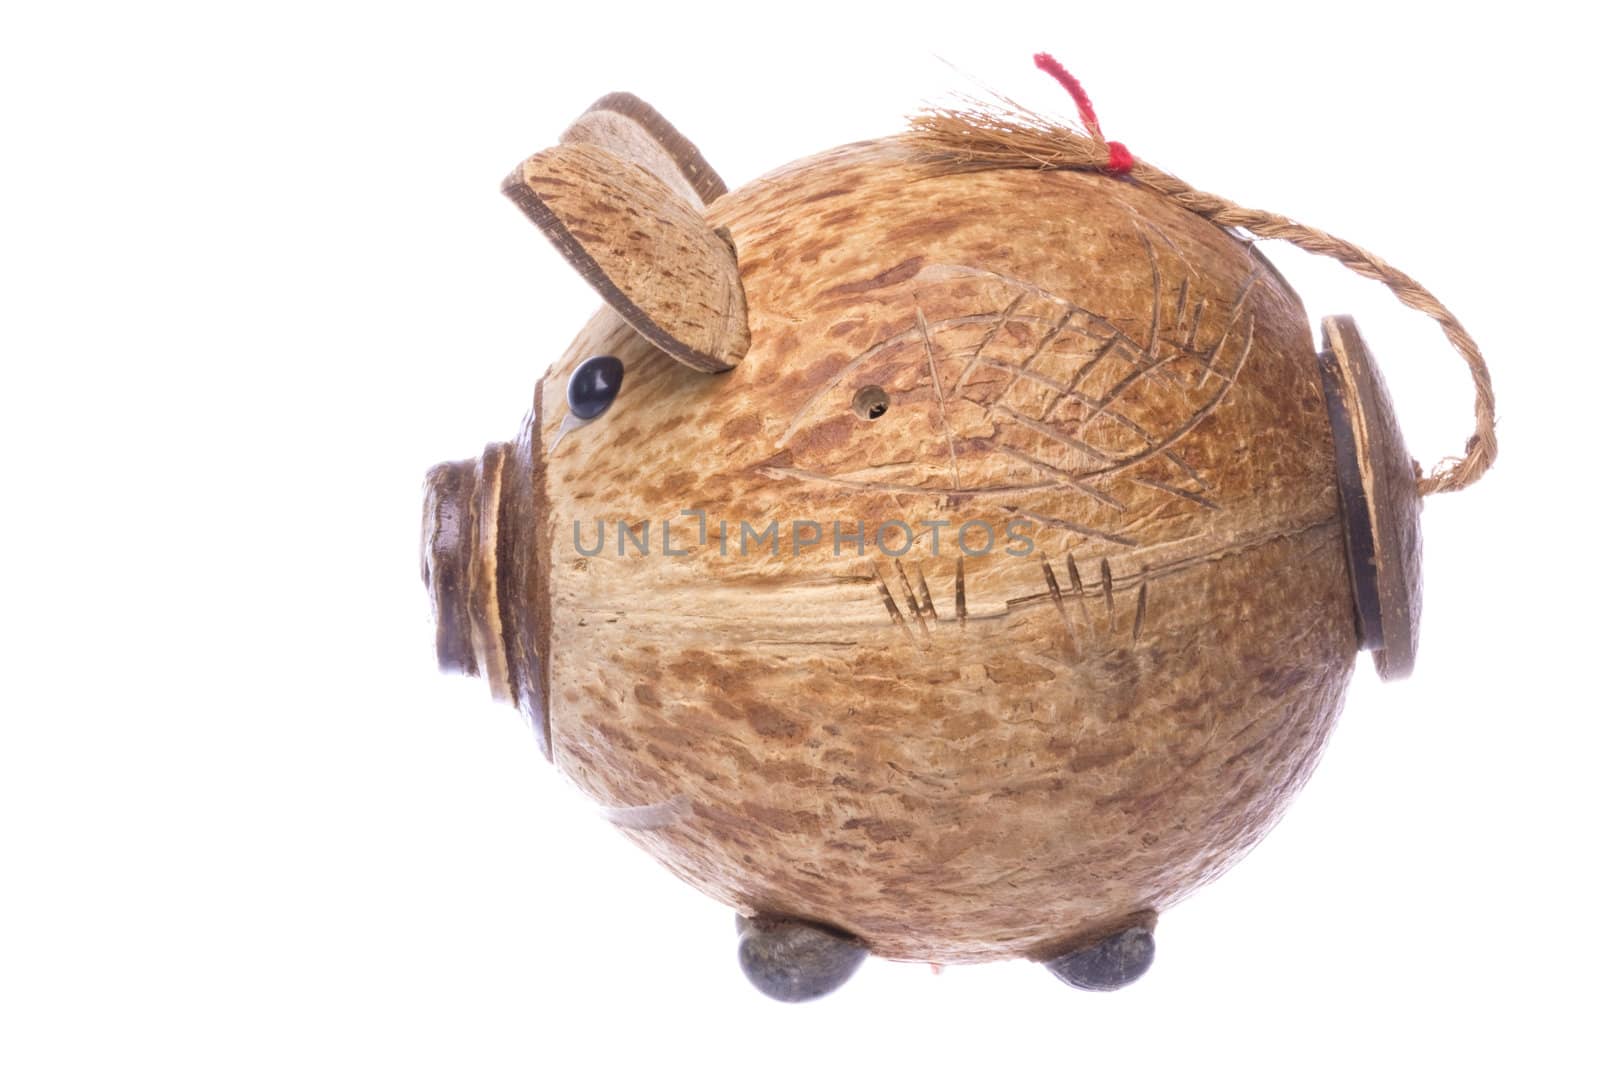 Isolated image of a coconut shell piggy bank.